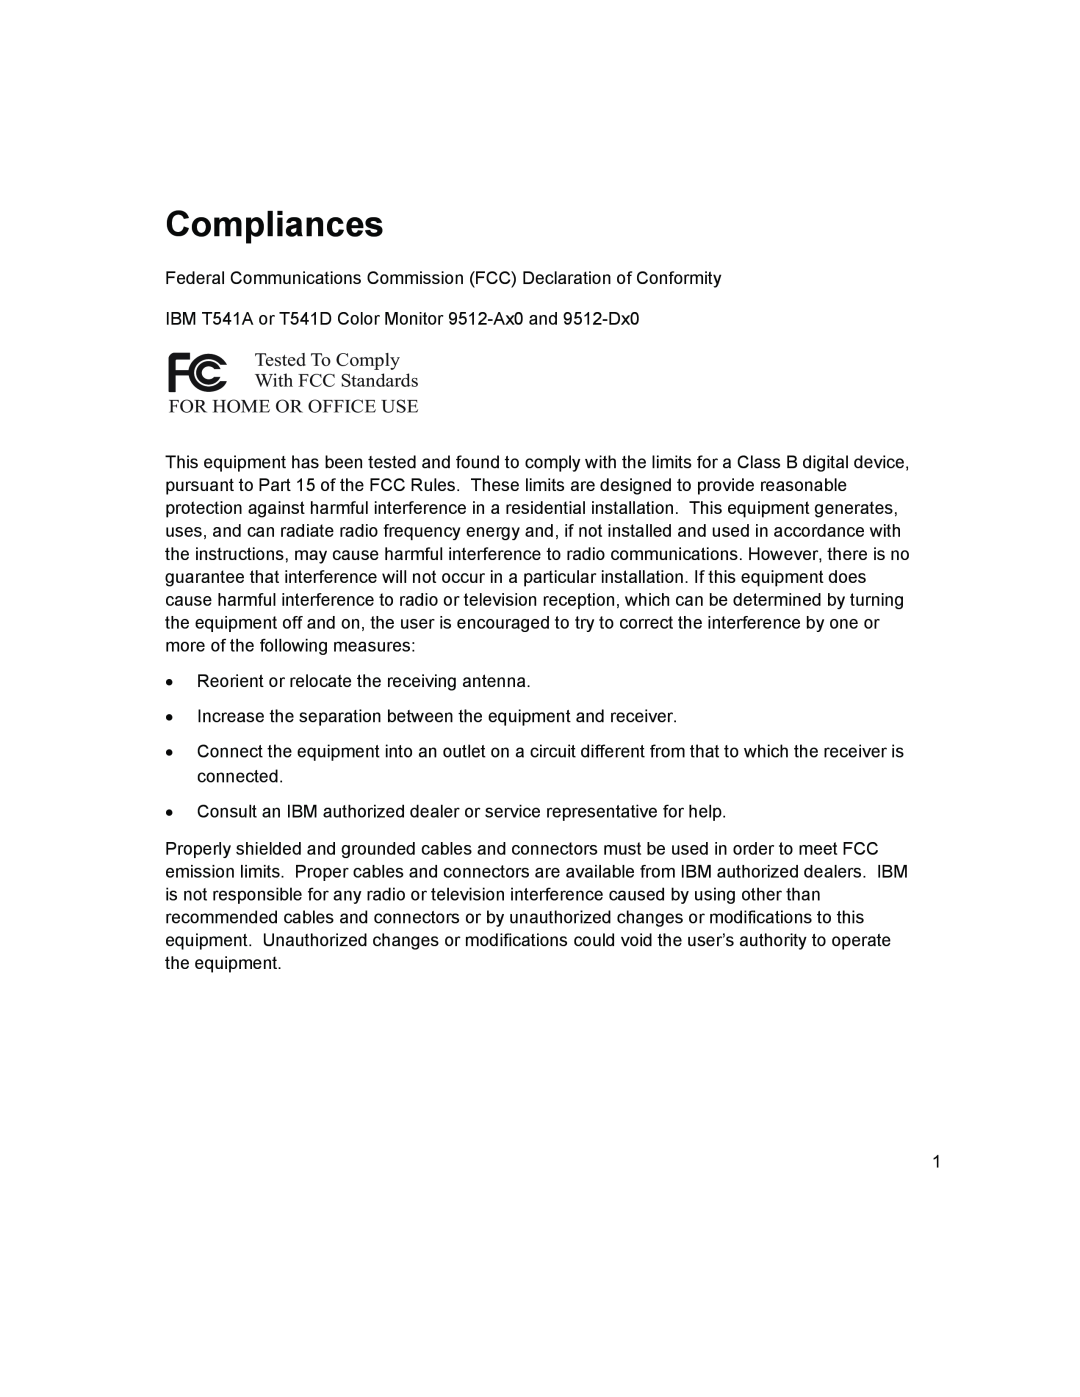 IBM T541A manual Compliances, Tested To Comply With FCC Standards FOR HOME OR OFFICE USE 